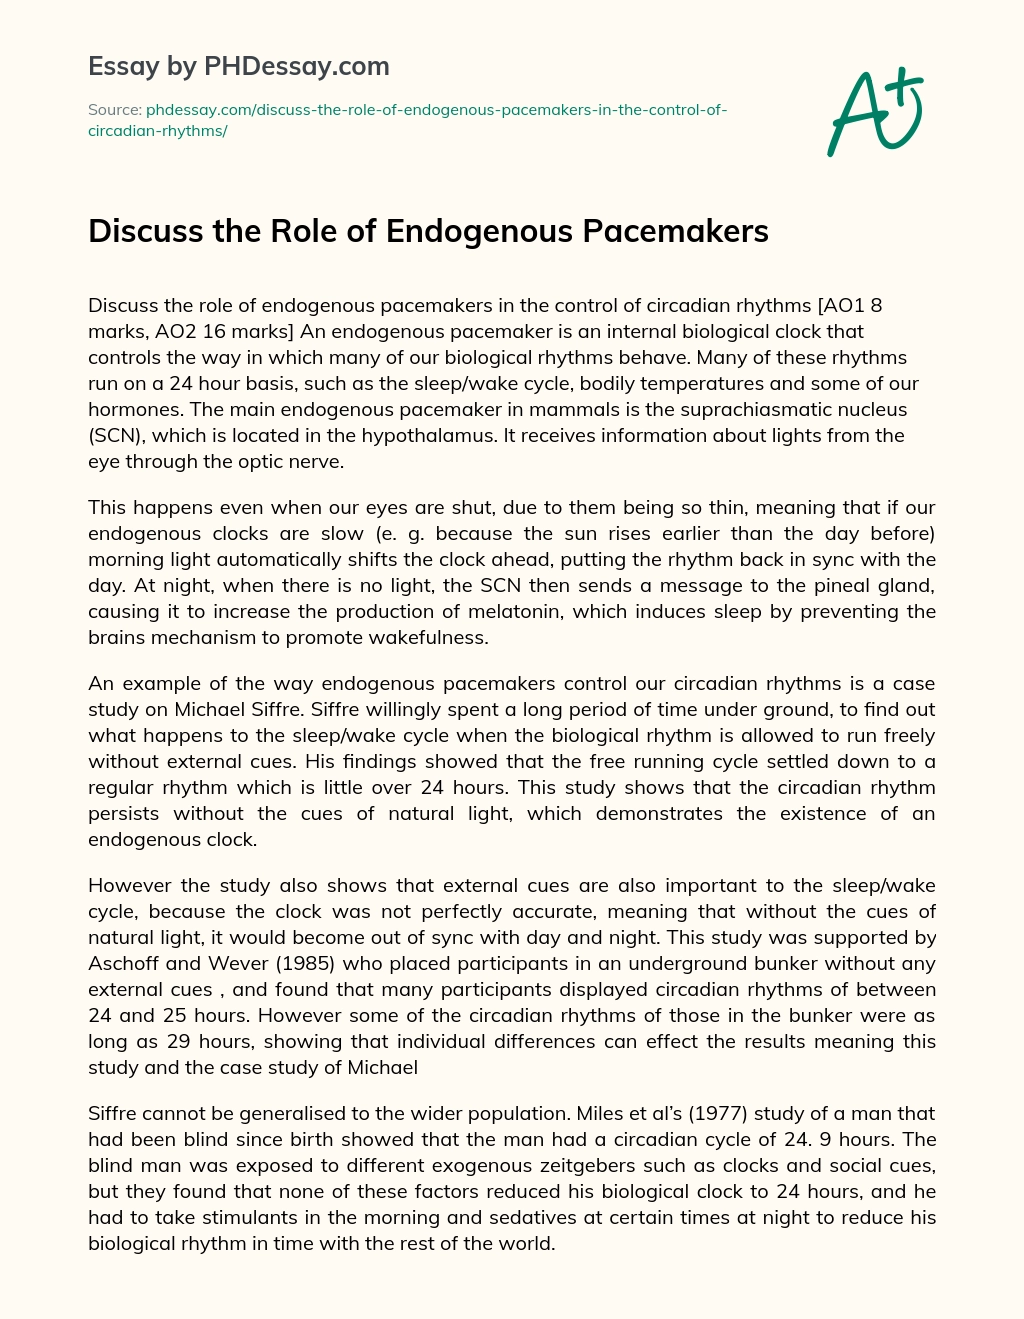 Discuss the Role of Endogenous Pacemakers essay